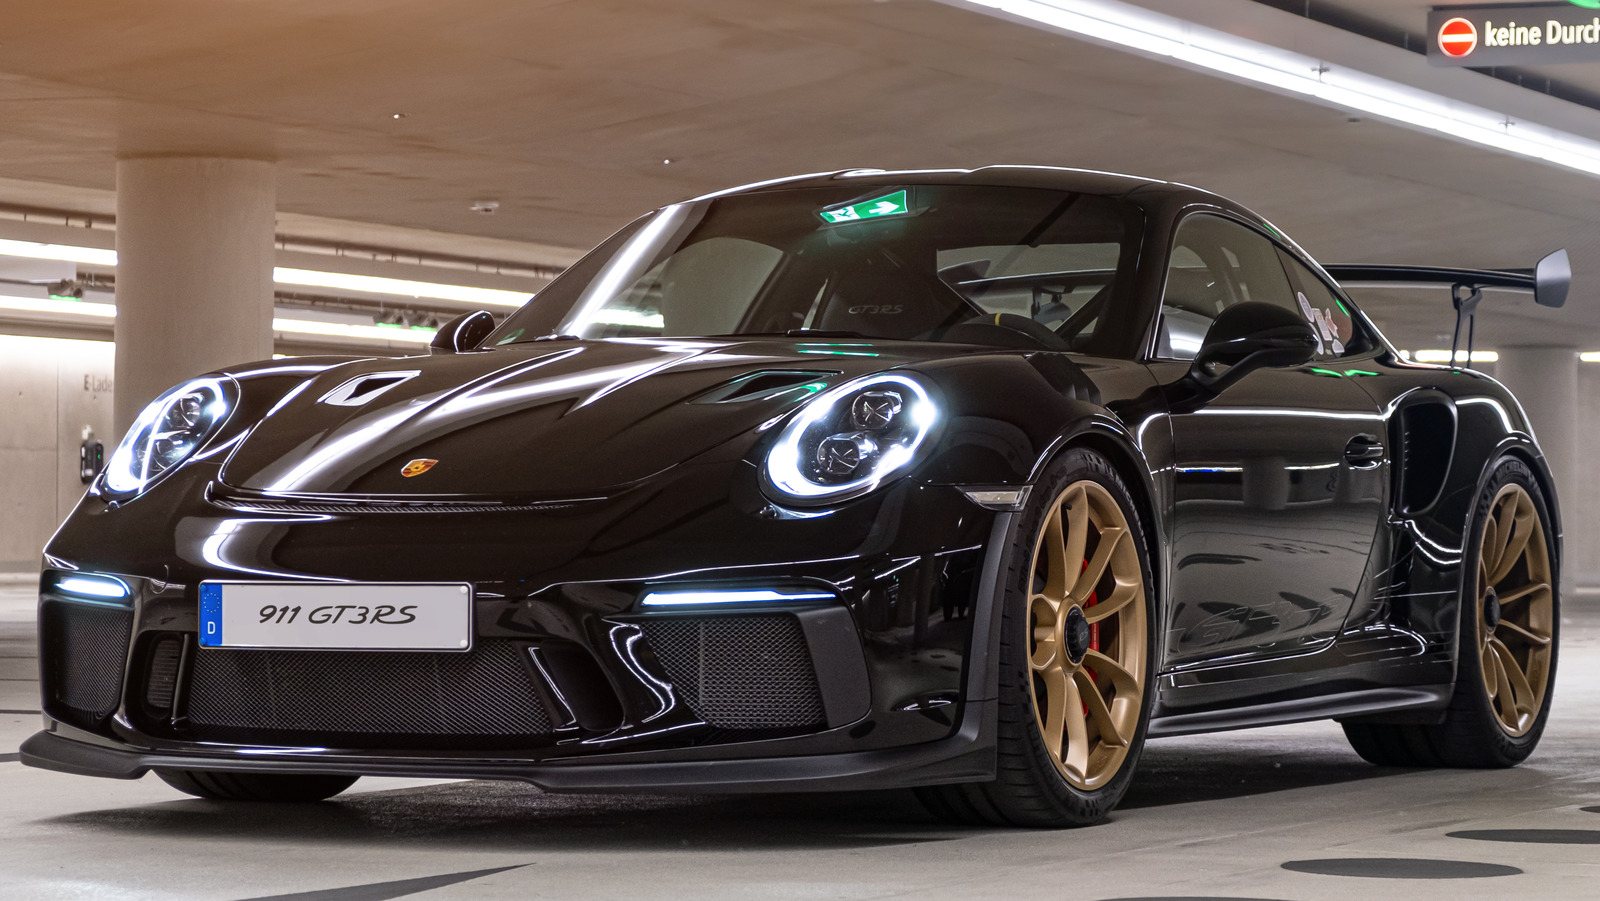 World’s Blackest Paint Meets A Porsche 911 And The Results Are Wild